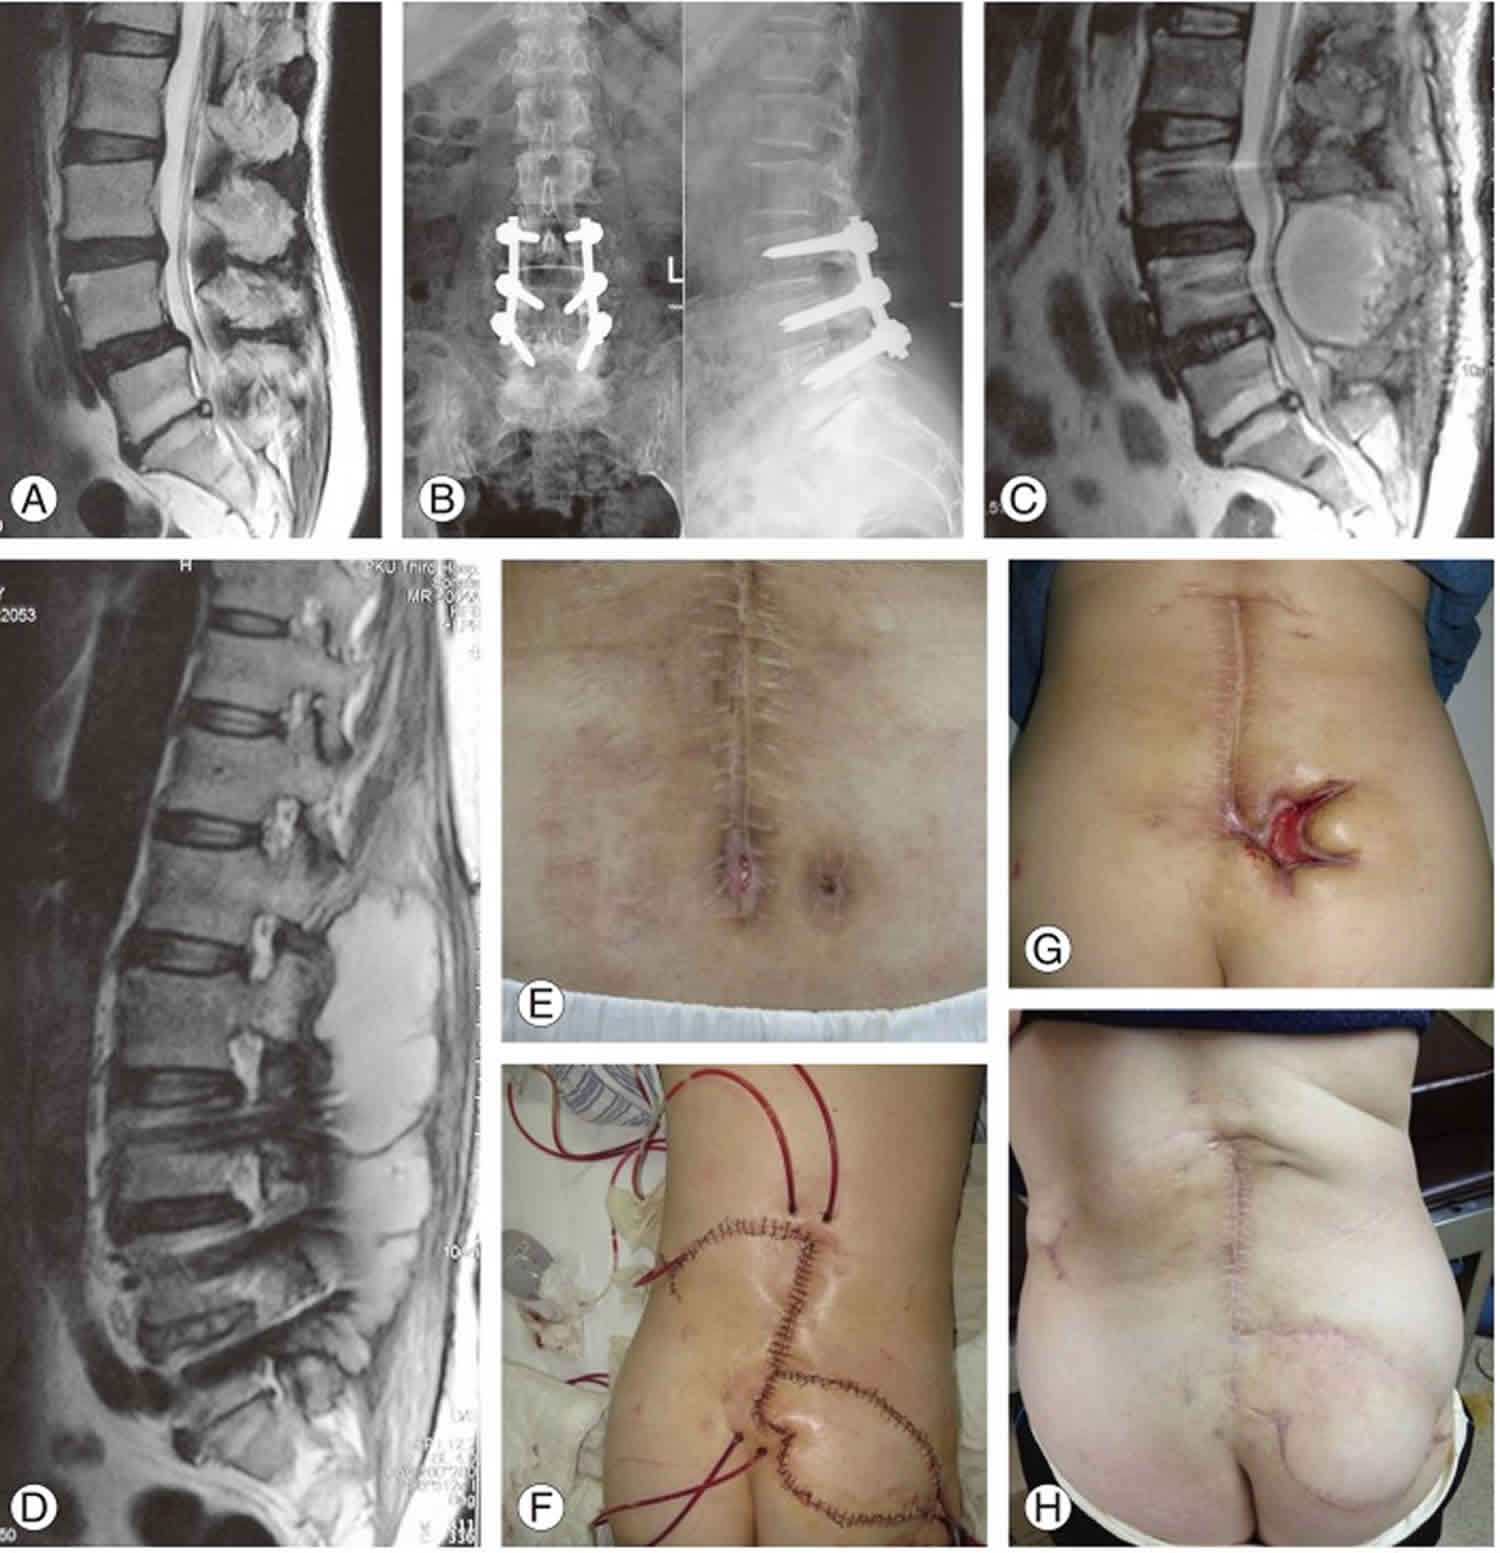 Spinal infection